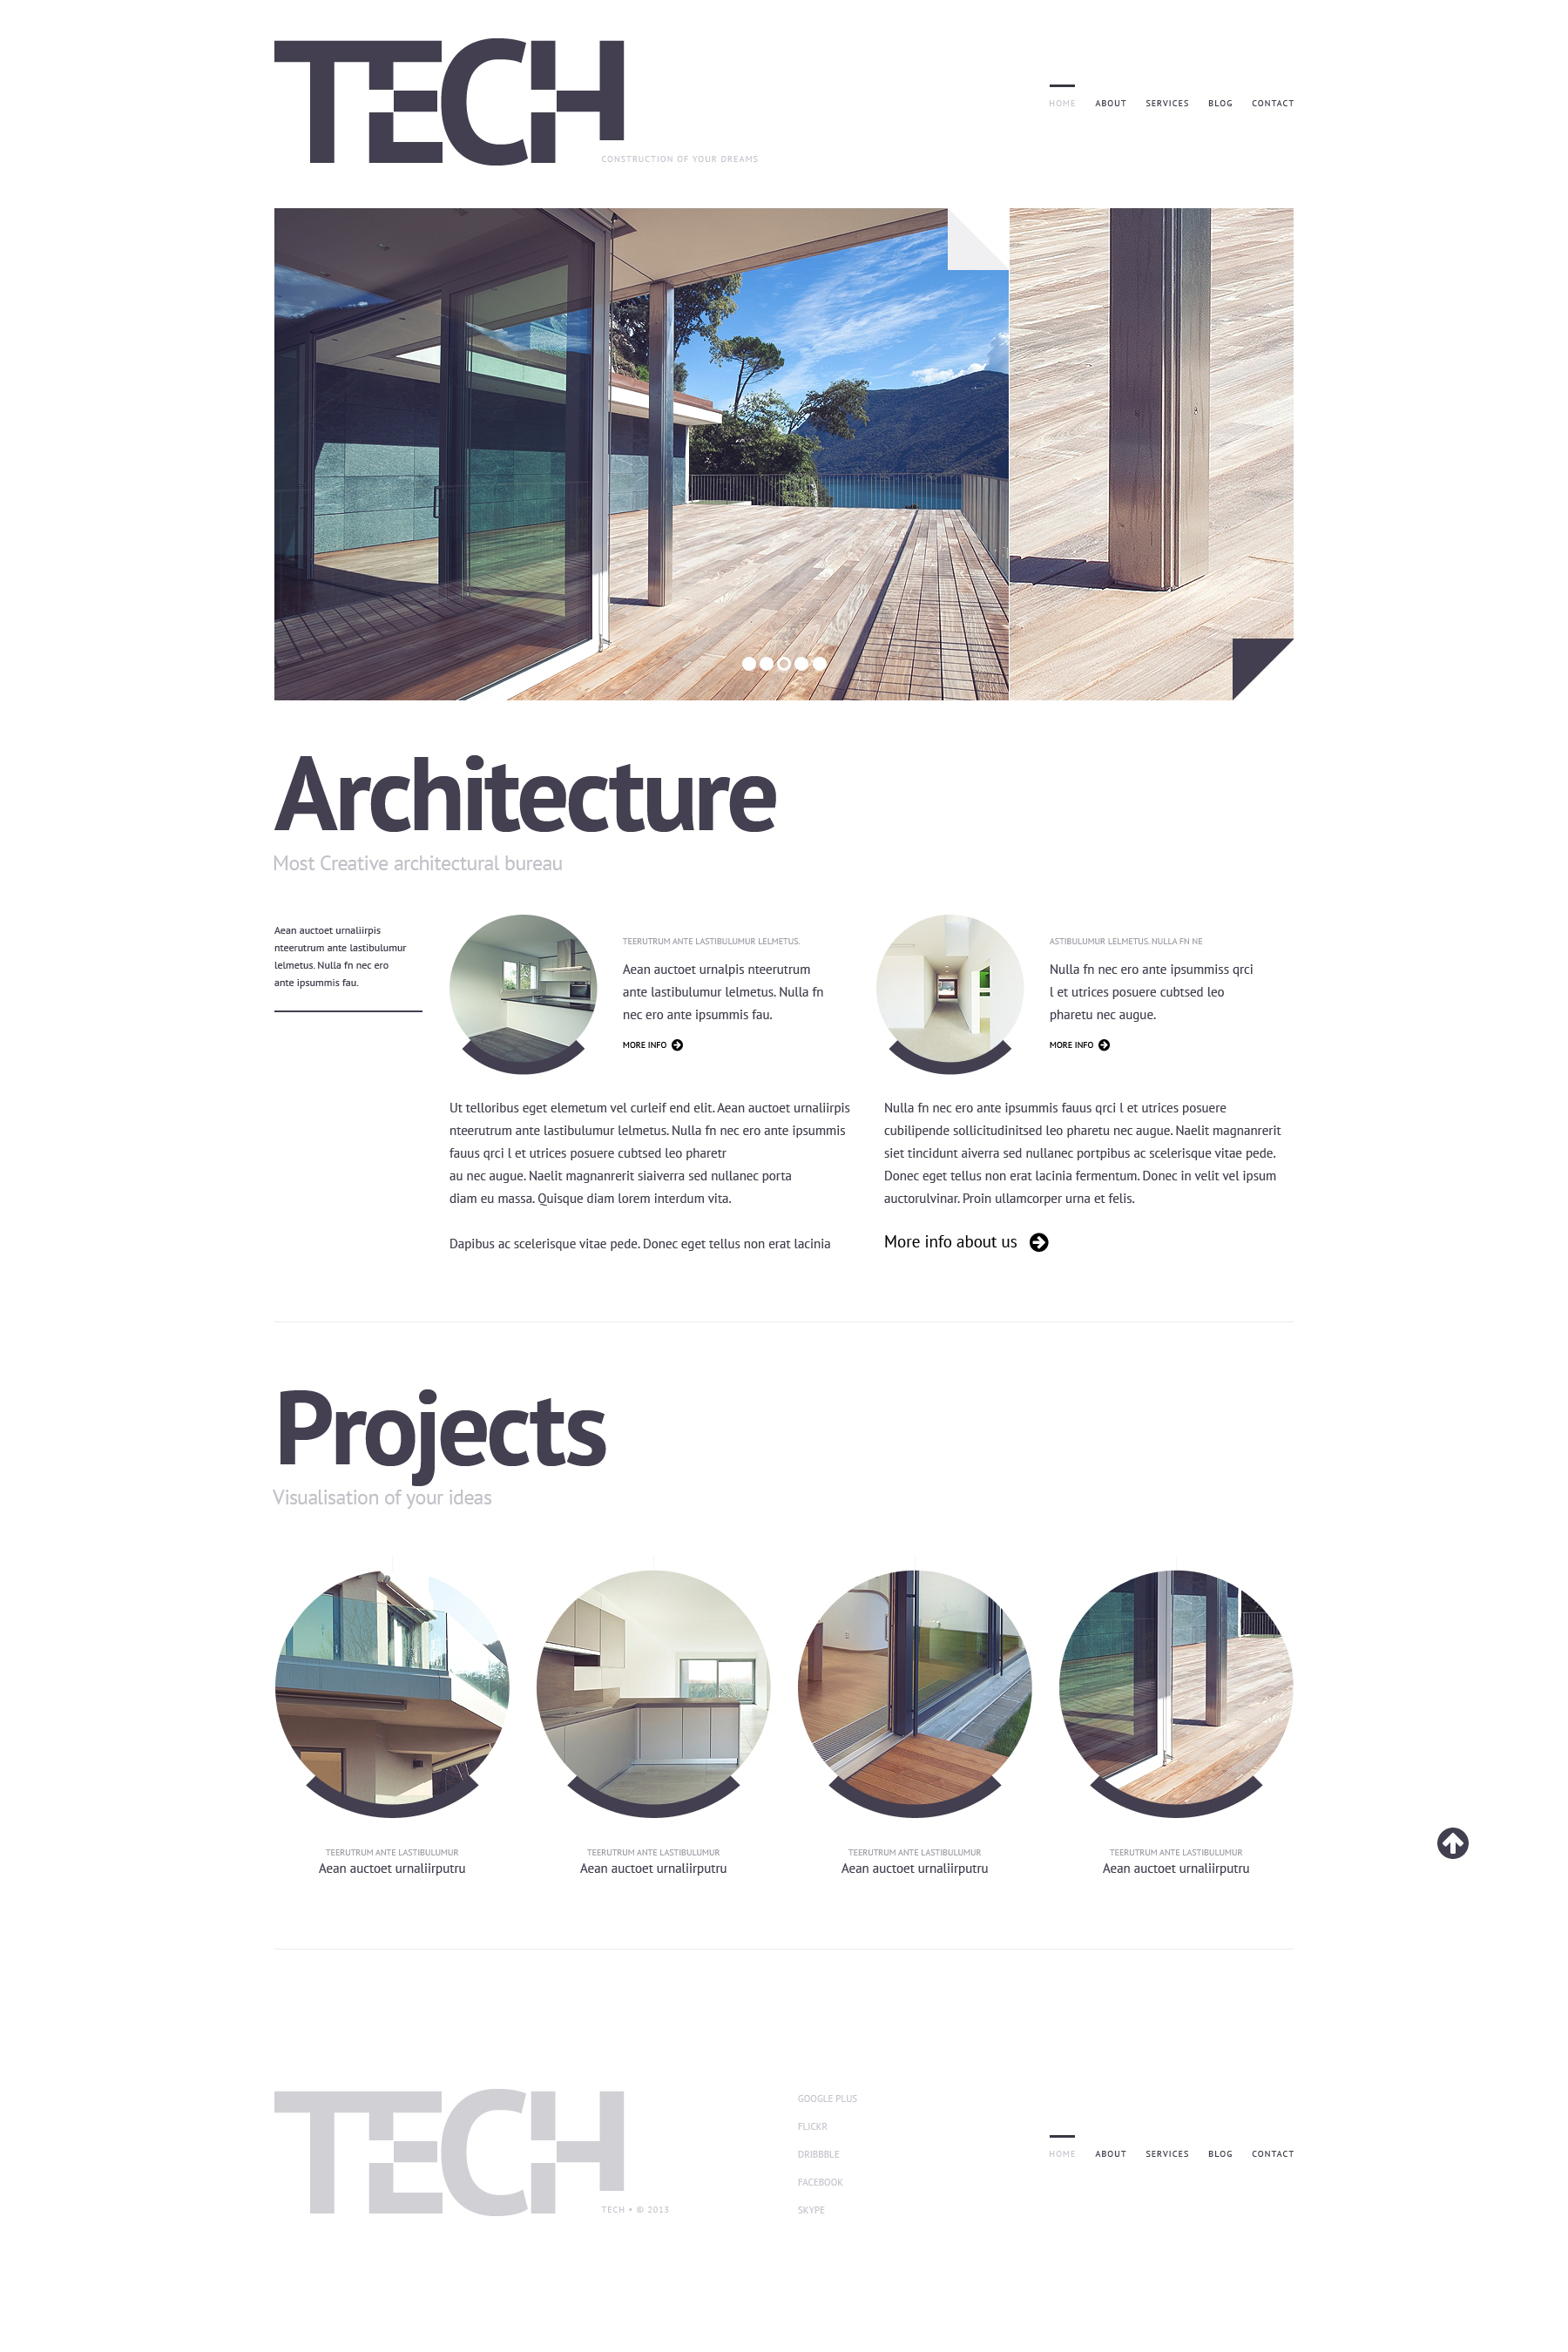 Construction Company Responsive Website Template